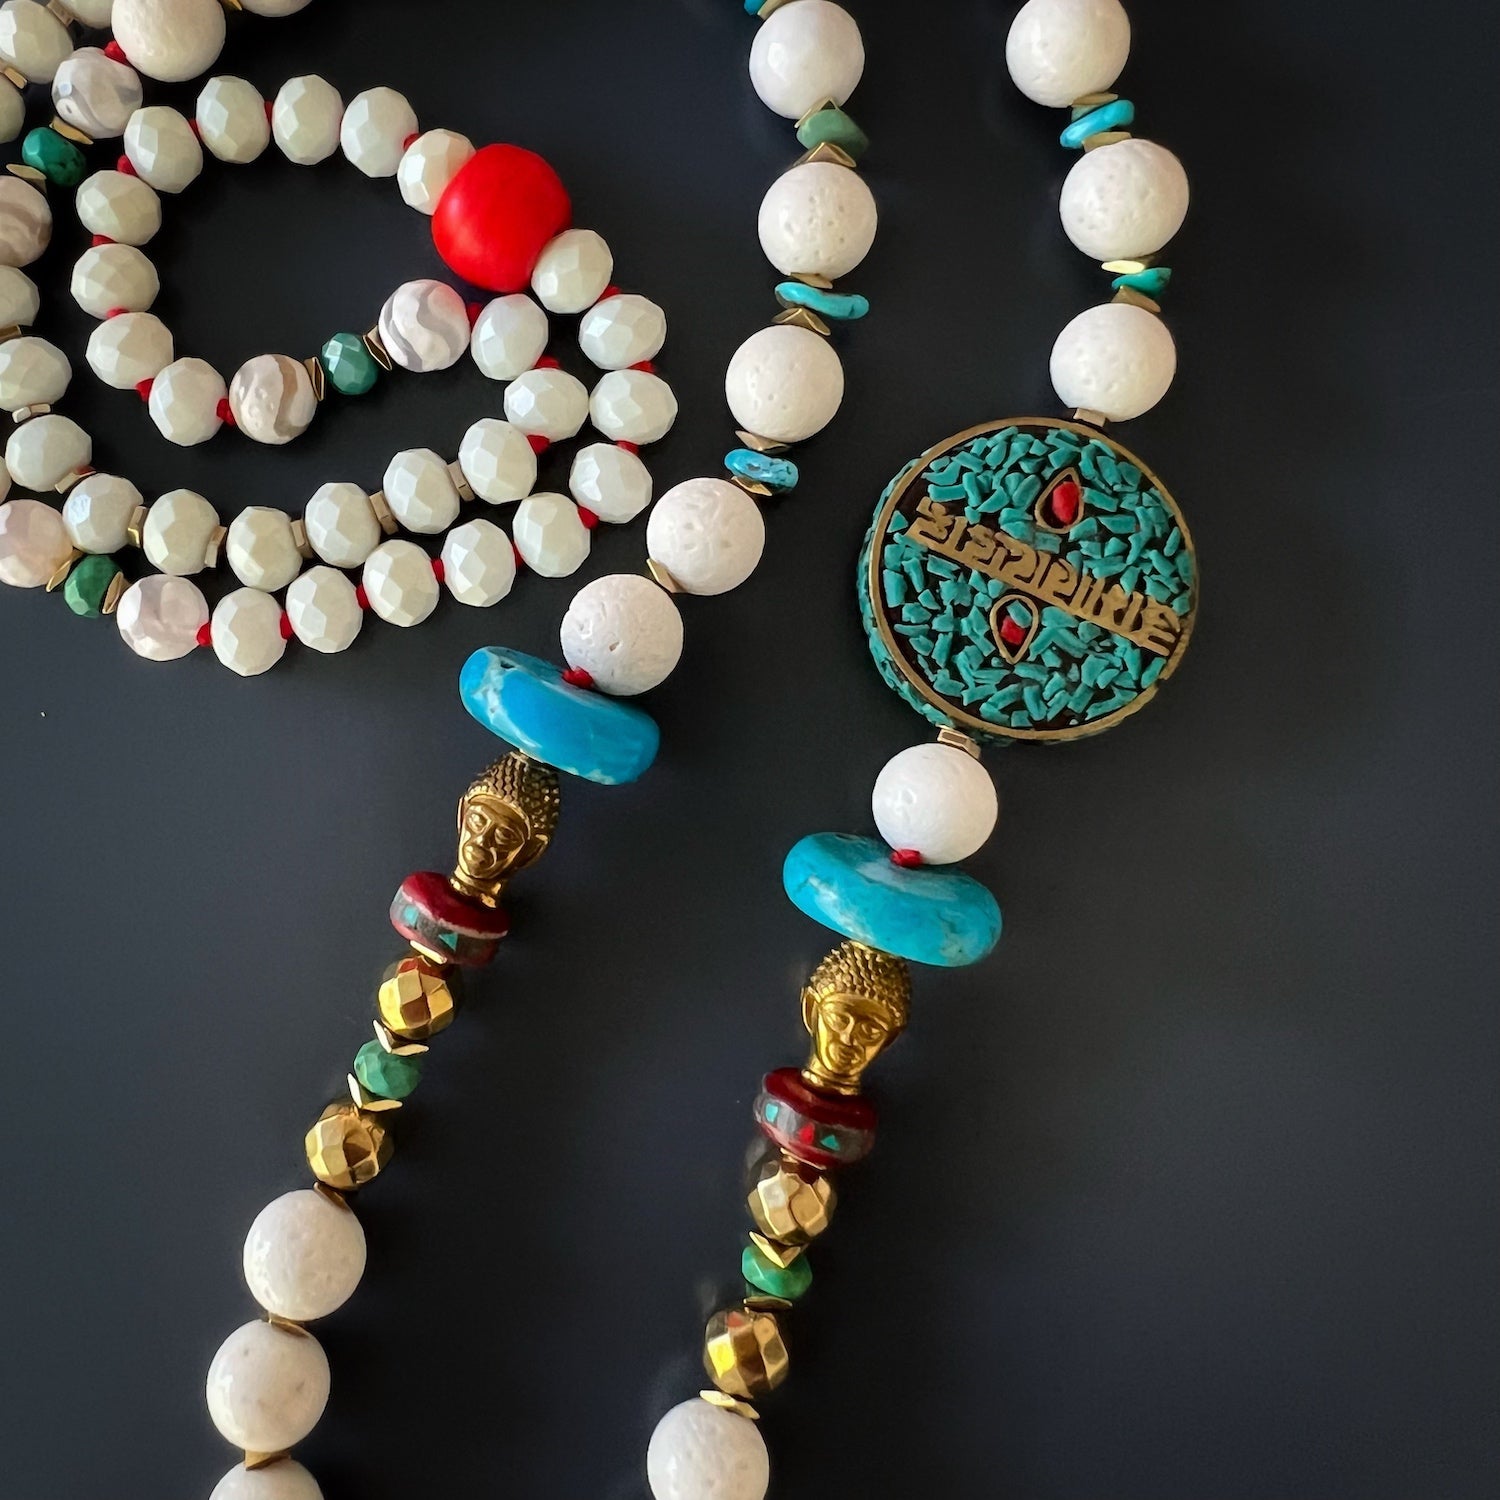 Symbol of Compassion: Nepal Om Mani Padme Hum bead, a centerpiece of the Mantra Necklace.